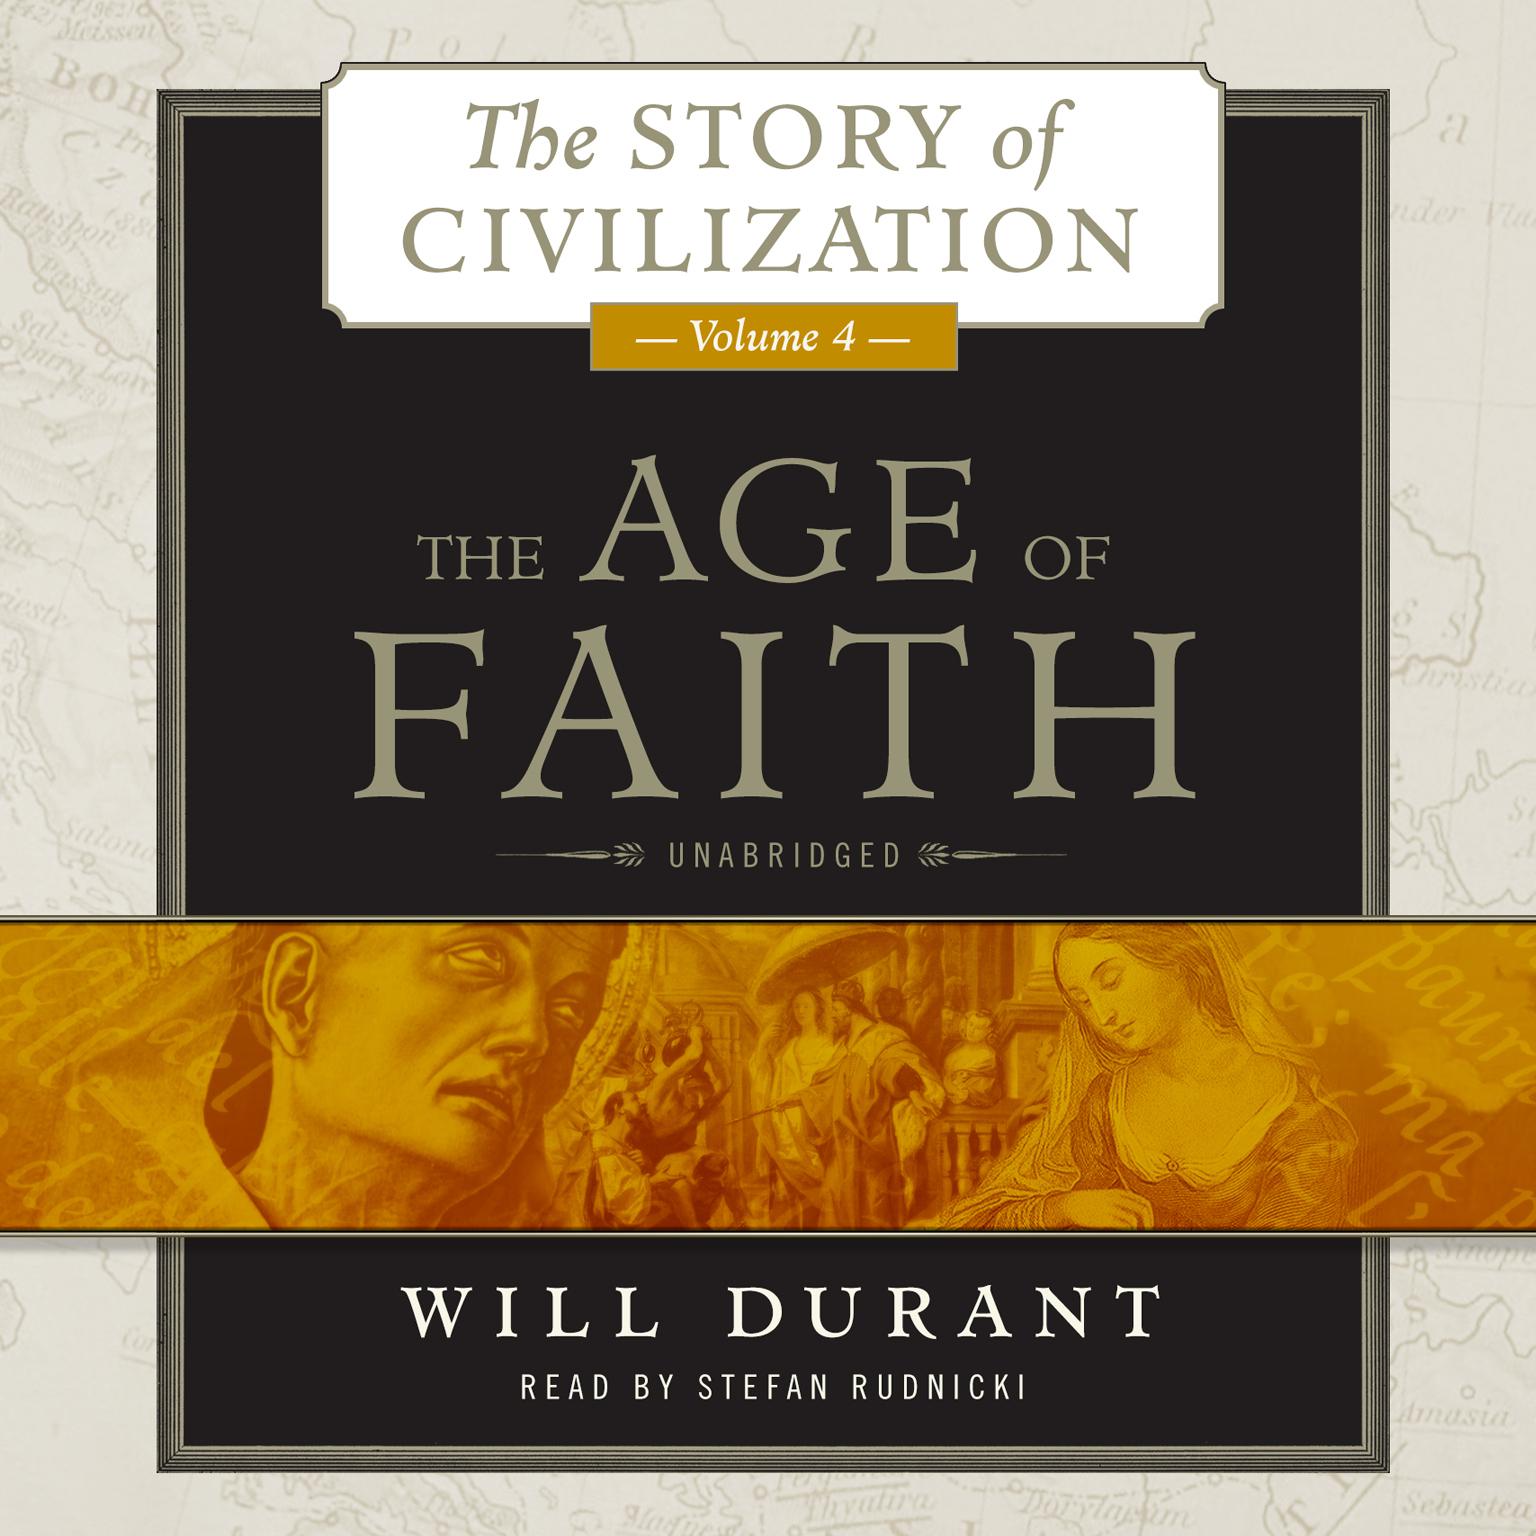 The Age of Faith: A History of Medieval Civilization (Christian, Islamic, and Judaic) from Constantine to Dante, AD 325–1300 Audiobook, by Will Durant